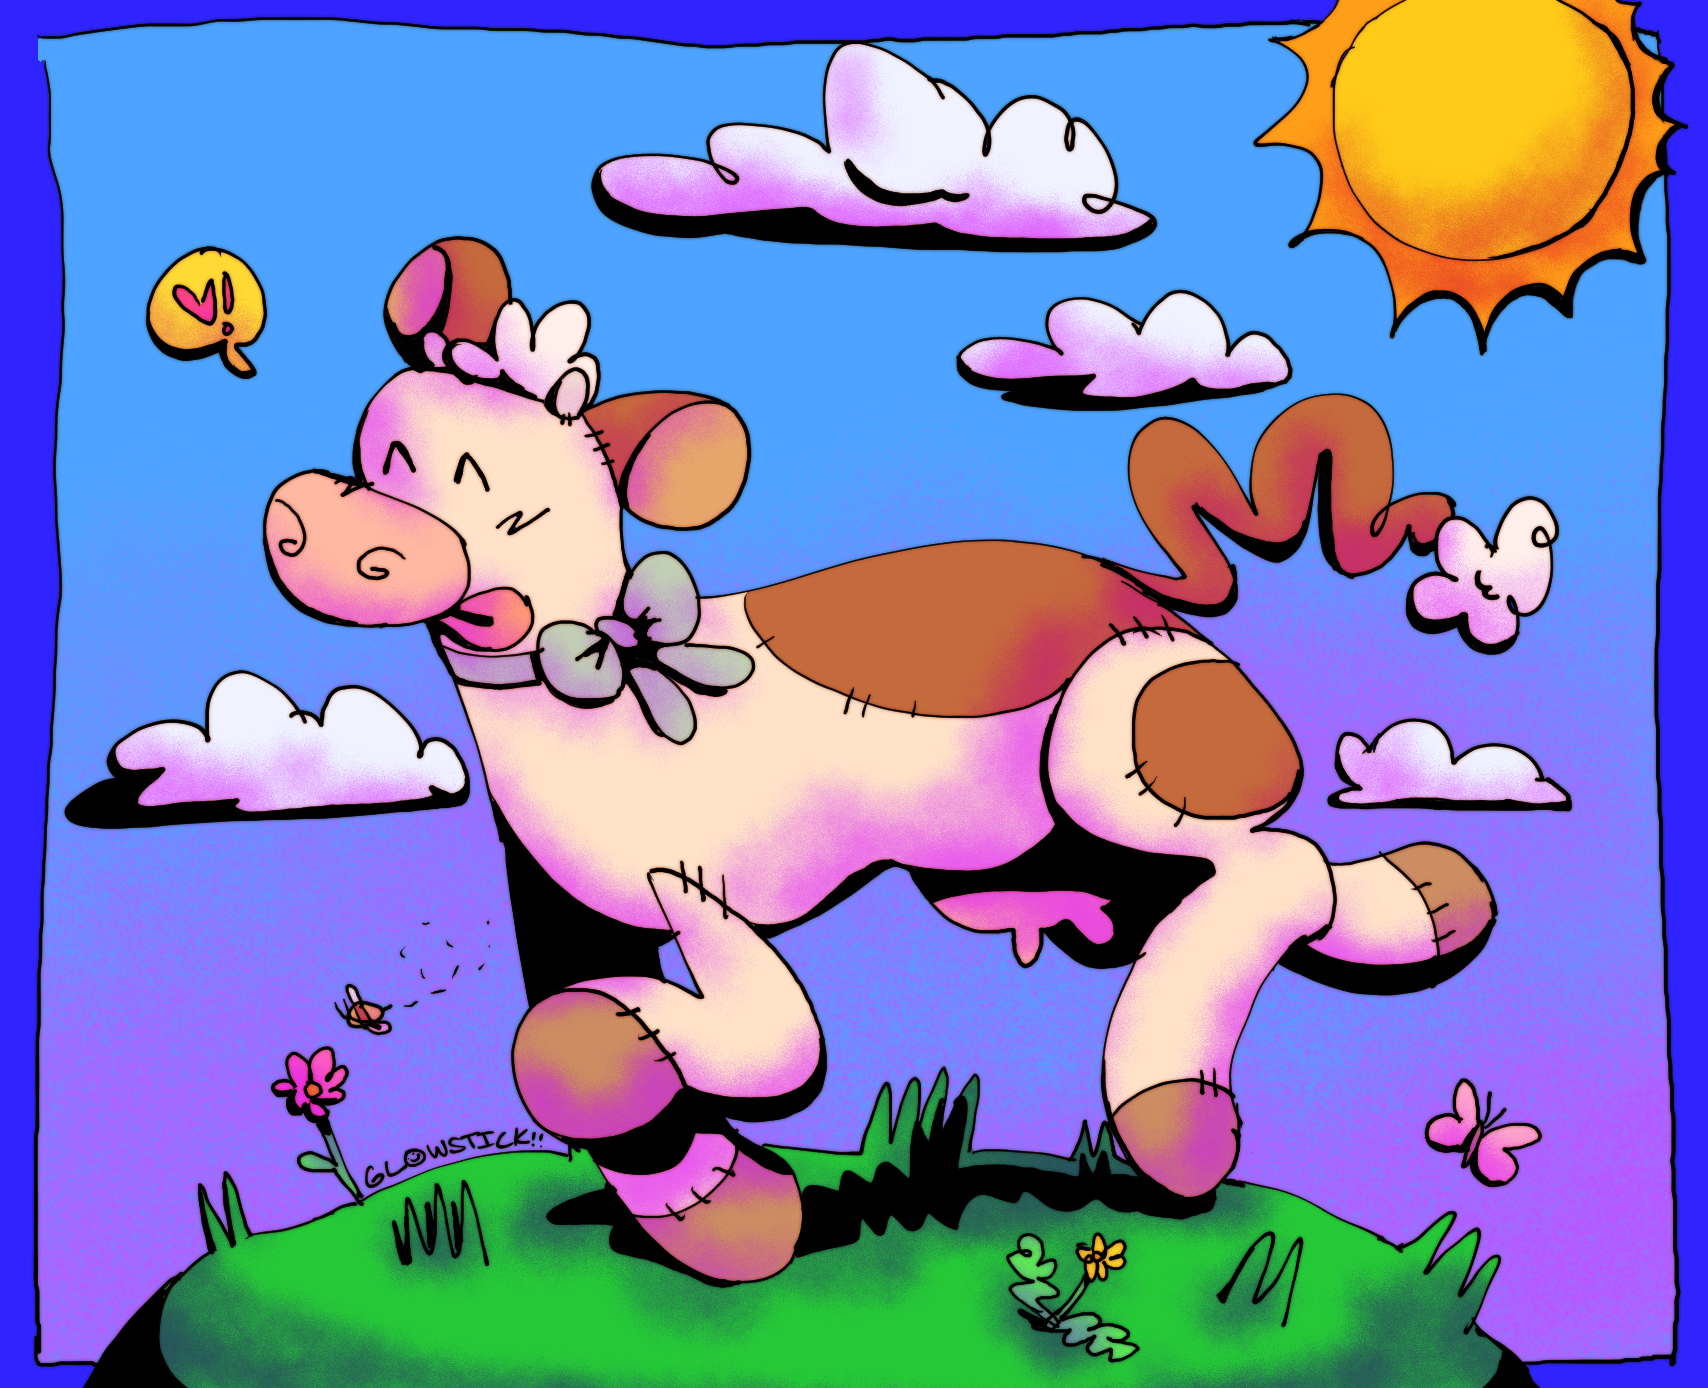  A digital drawing of a cow character, stylized to look like a plushie. They are white with brown spots and have a small blue bow around their neck. They are drawn prancing on a small field, with a blue, cloud-filled sky in the background and a stereotypical cartoon sun in the right corner.